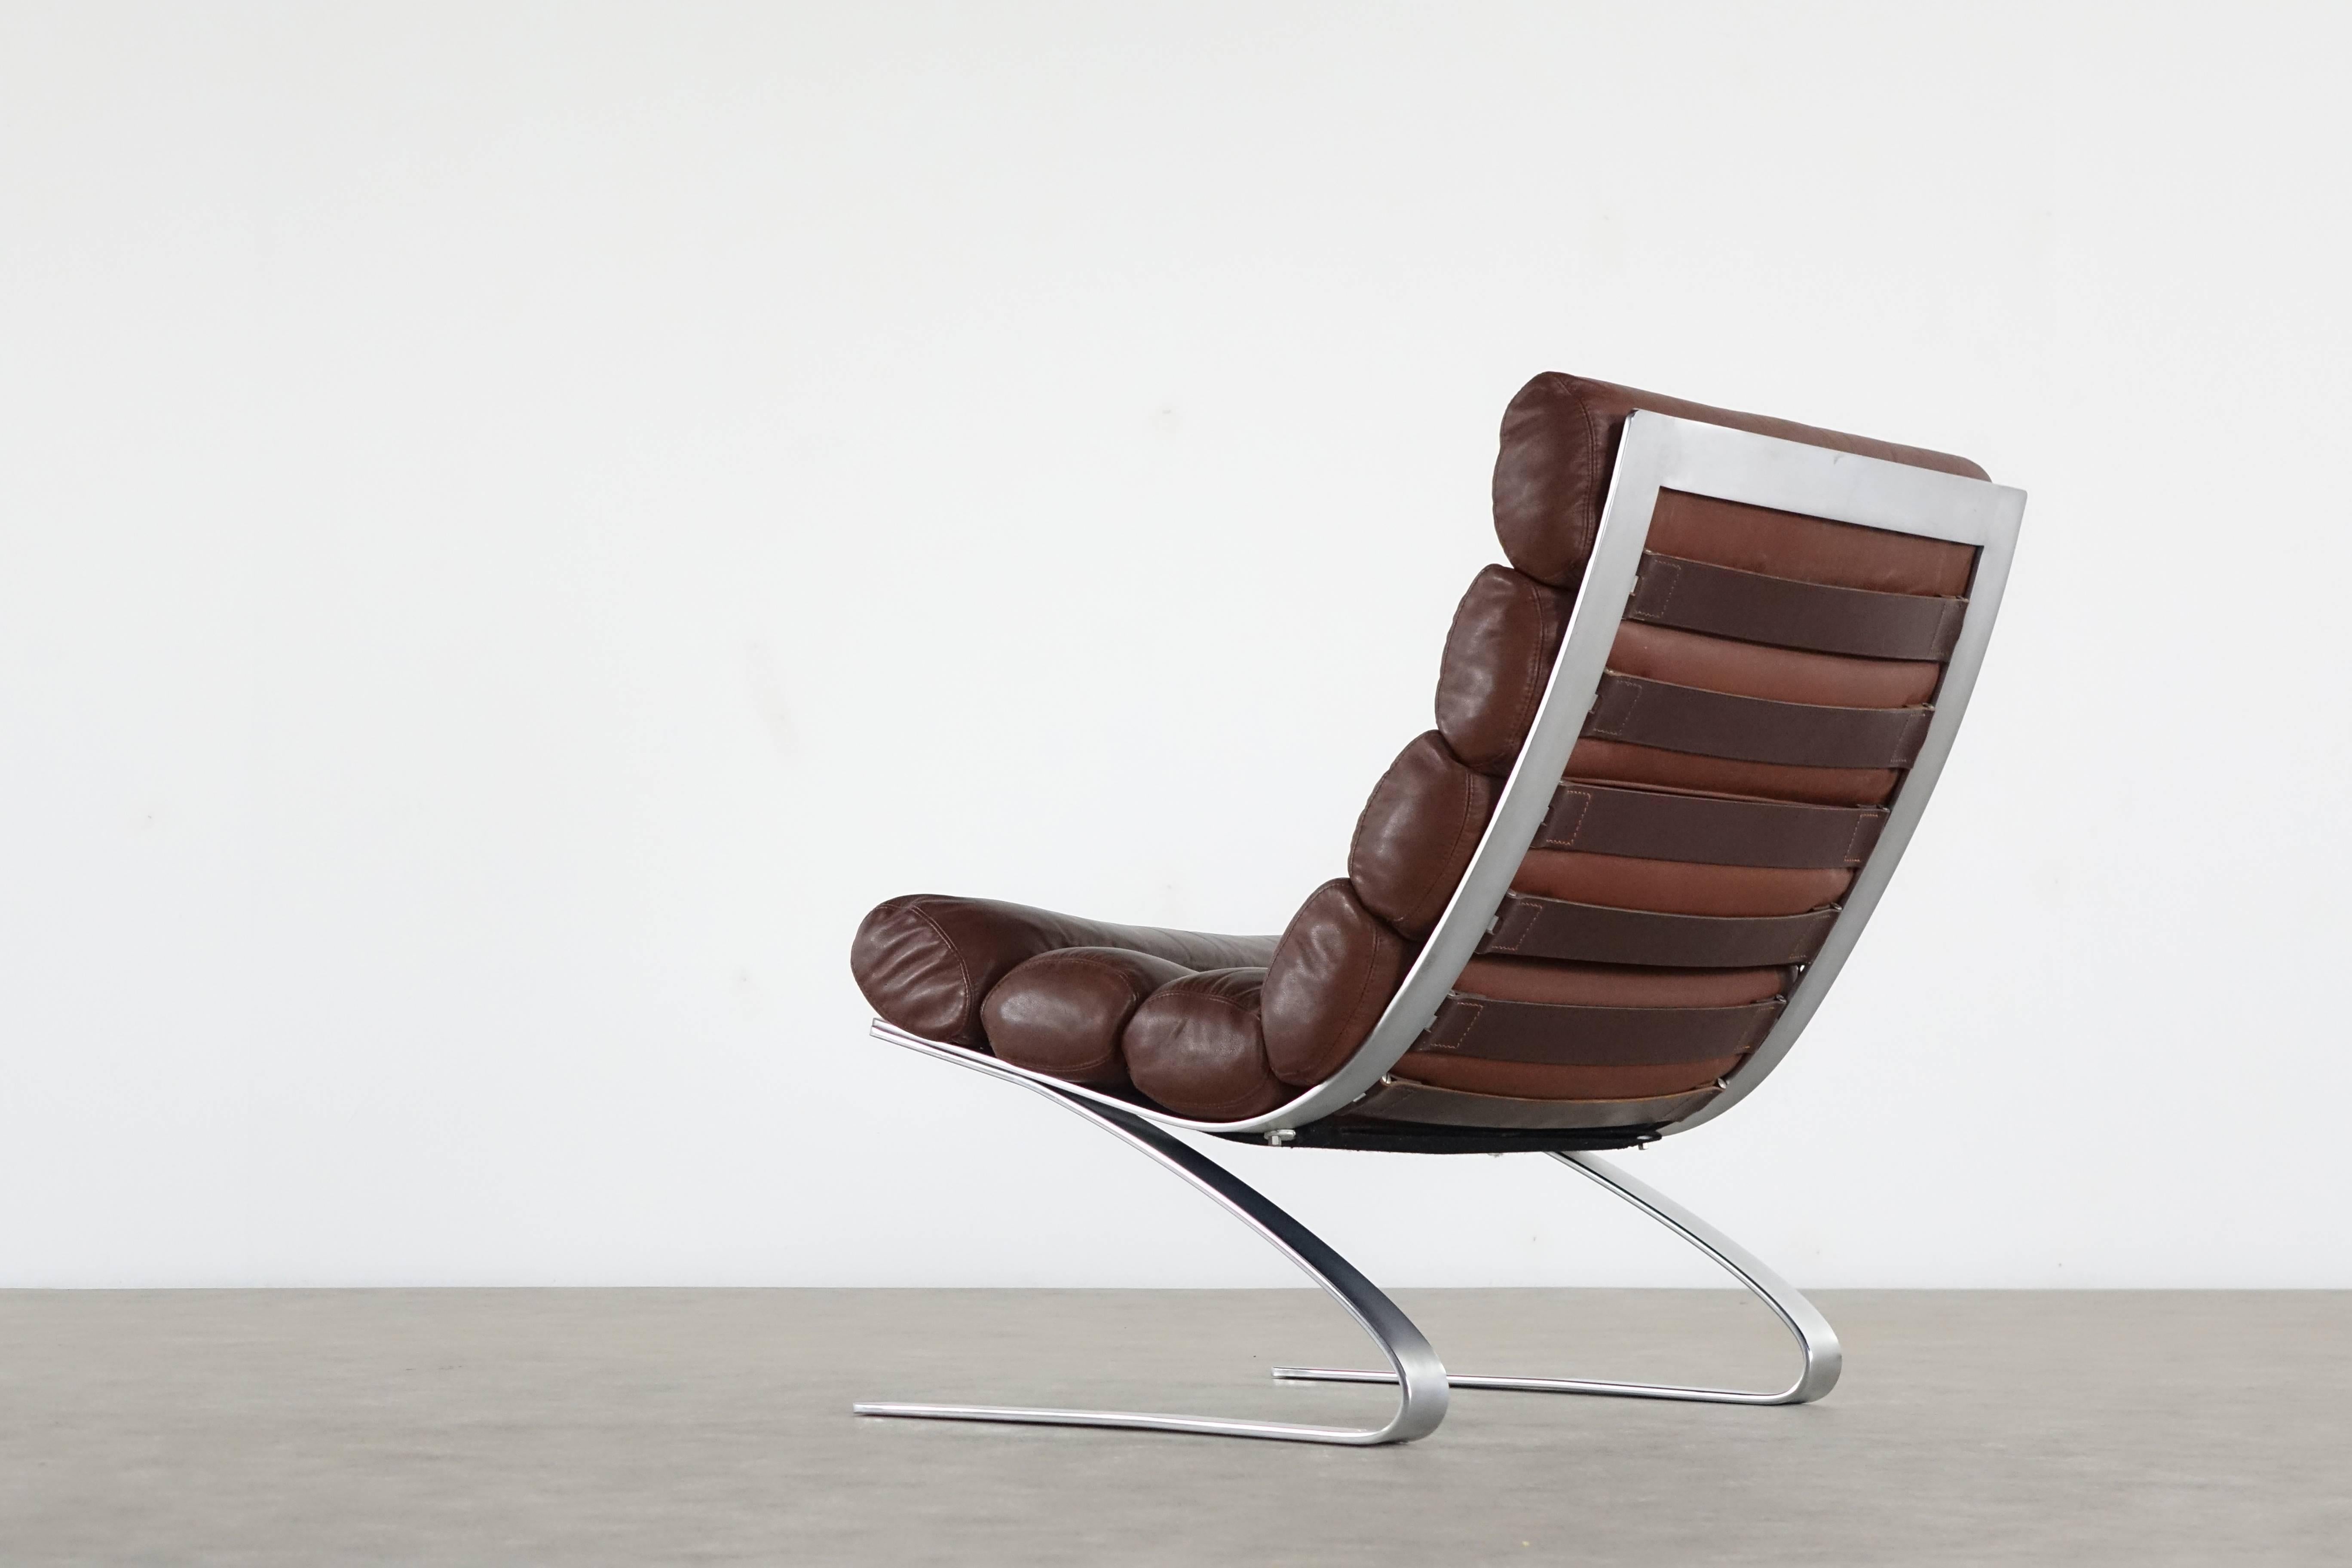 German COR Sinus Easychair Lounge Chair, 1976 by Reinhold Adolf in Chocolate Leather